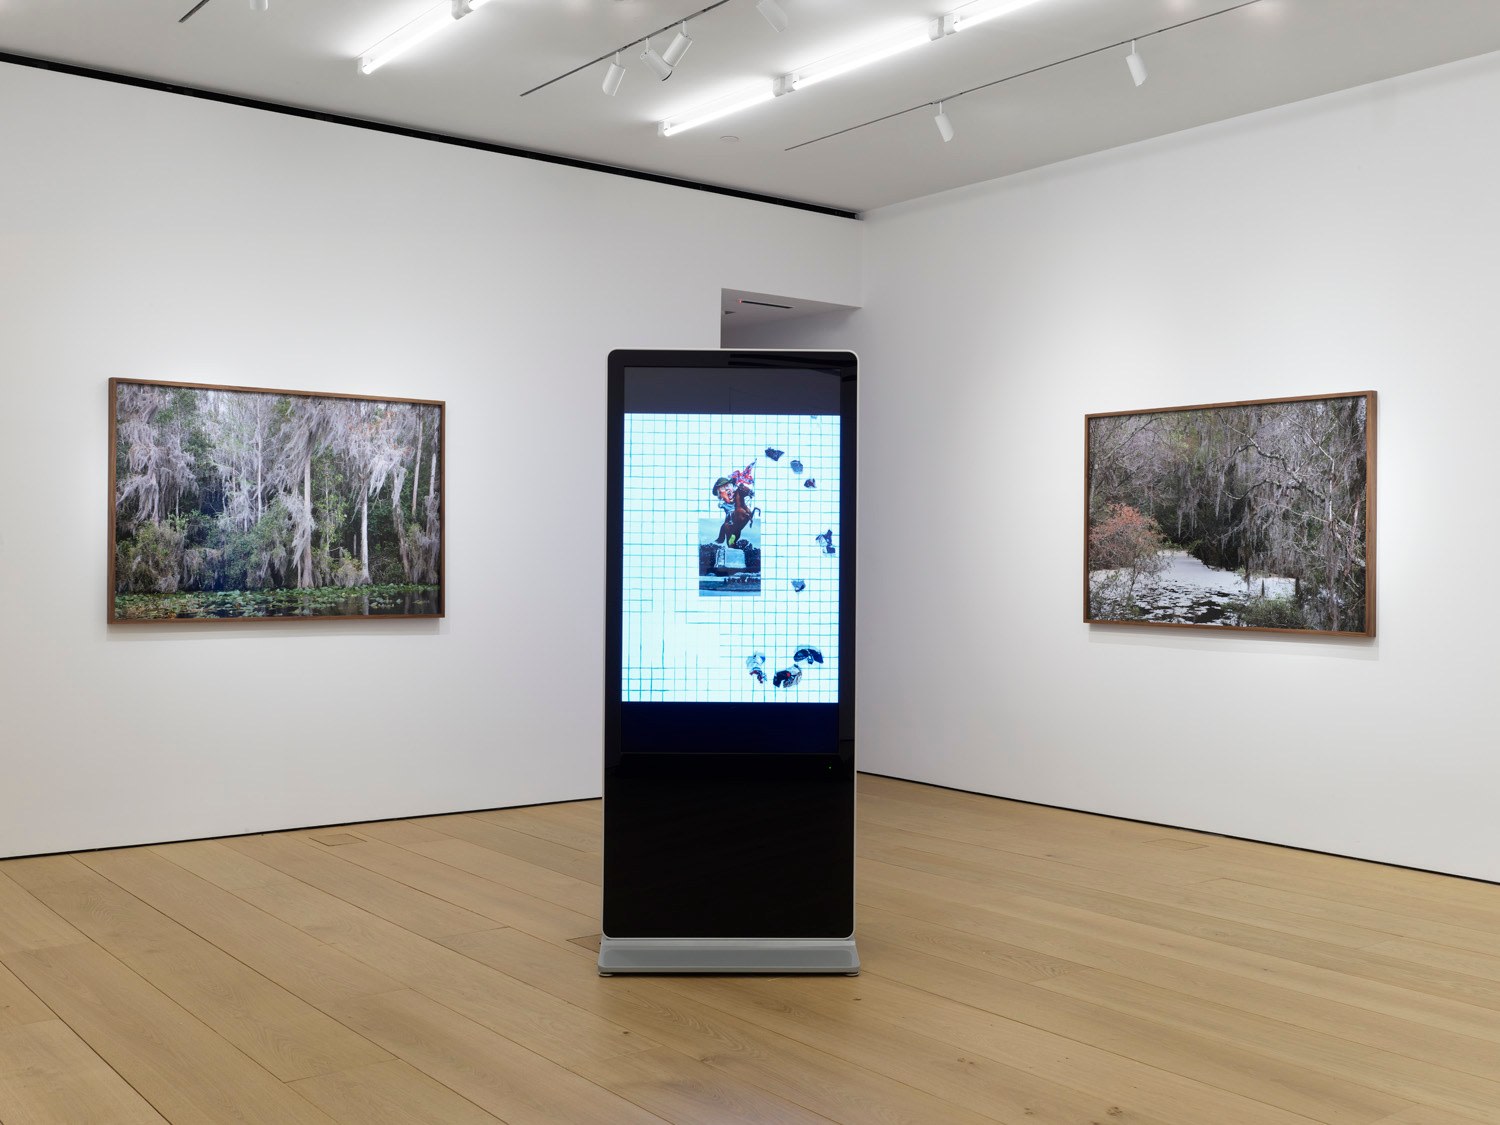 Fourth installation view of the exhibition Catherine Opie: Rhetorical Landscapes at Lehmann Maupin New York